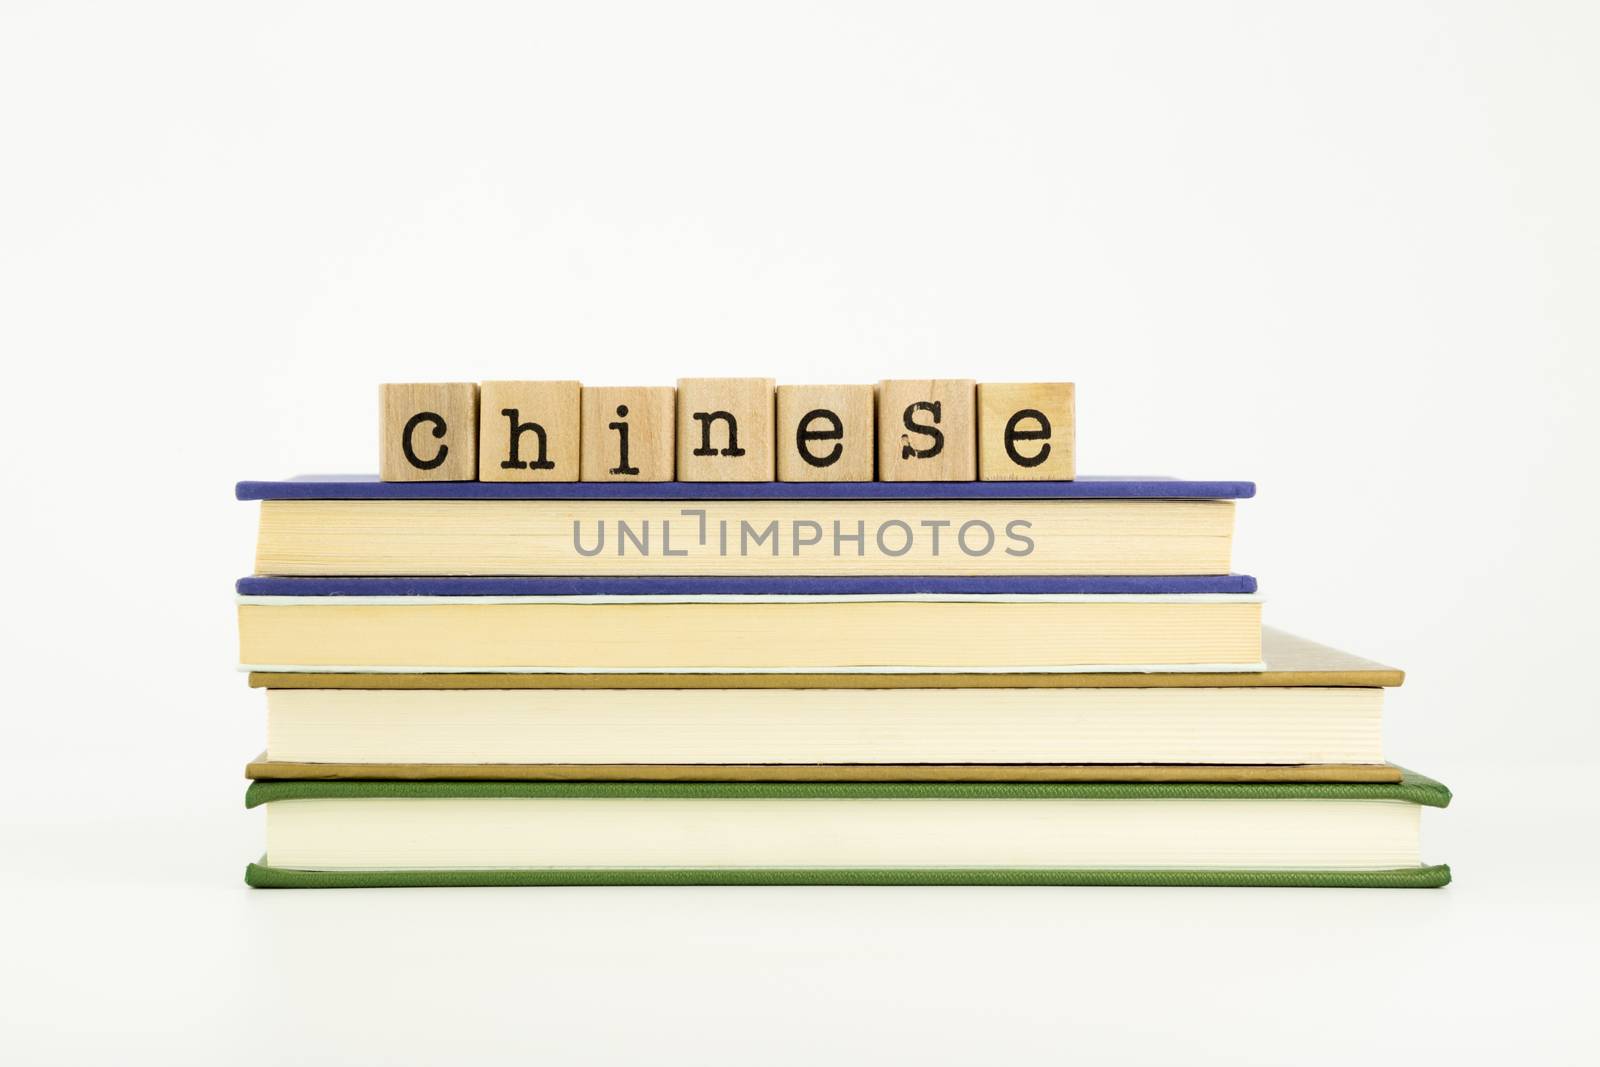 chinese language word on wood stamps and books by vinnstock